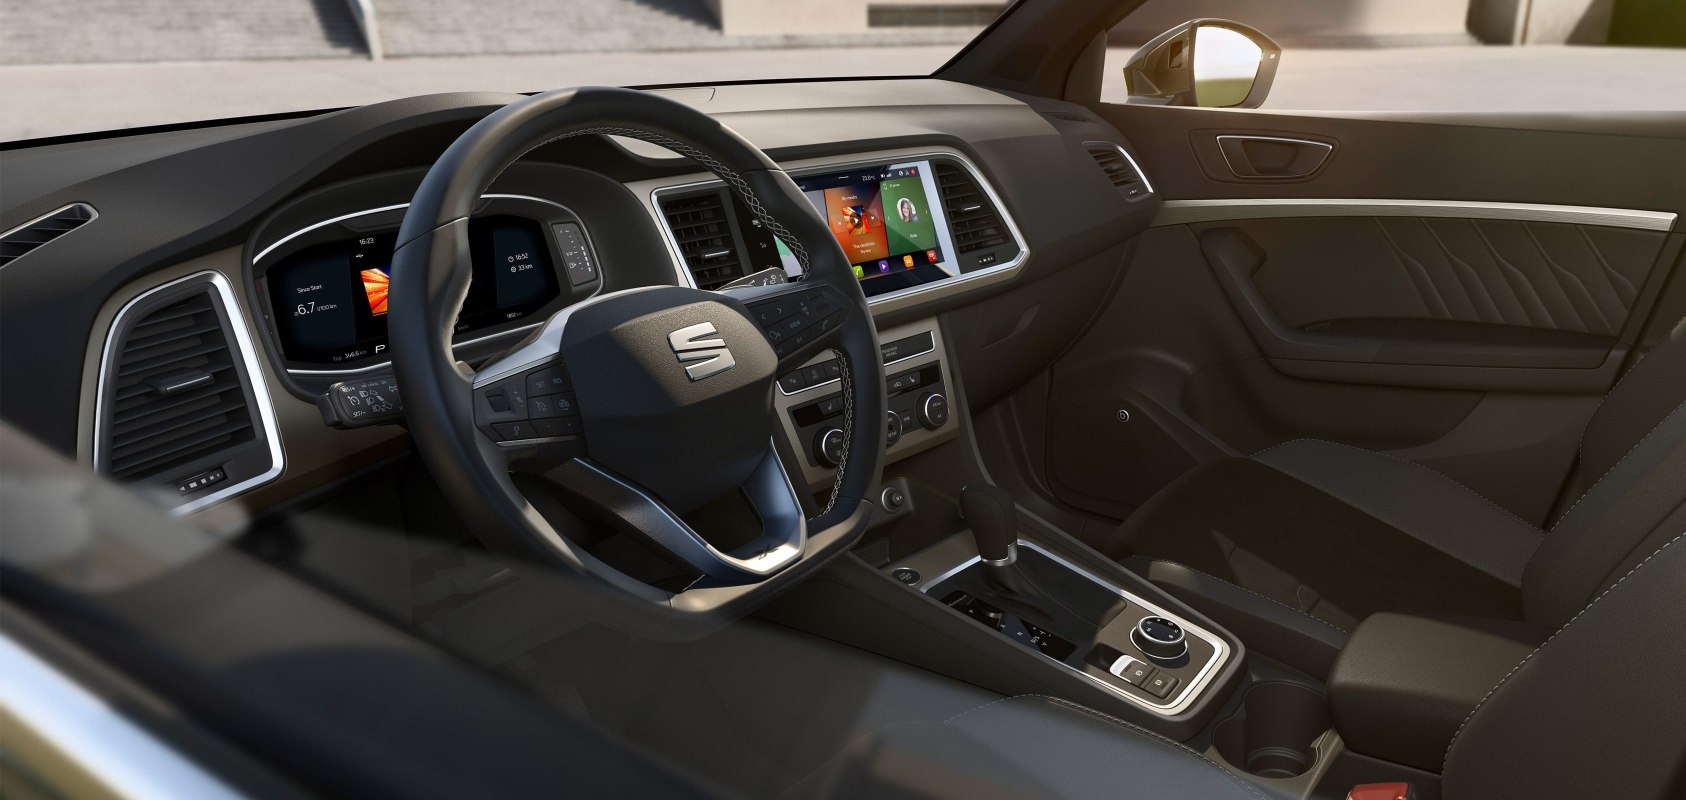 SEAT Ateca SUV detailed view of dashboard